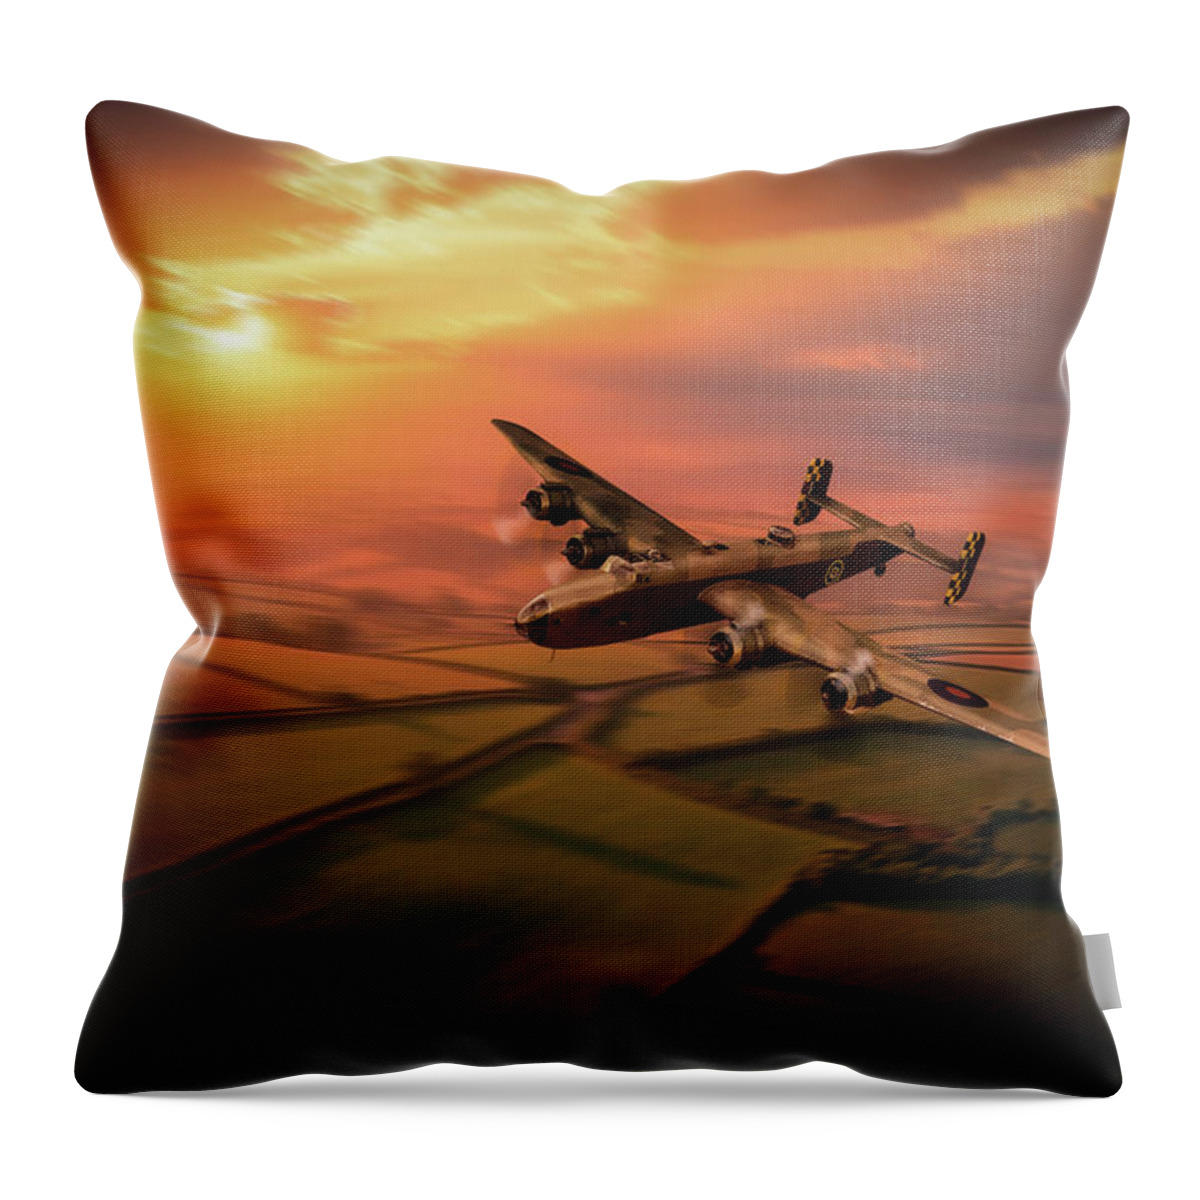 Handley Page Halifax Throw Pillow featuring the digital art Handley Page Halifax by Airpower Art